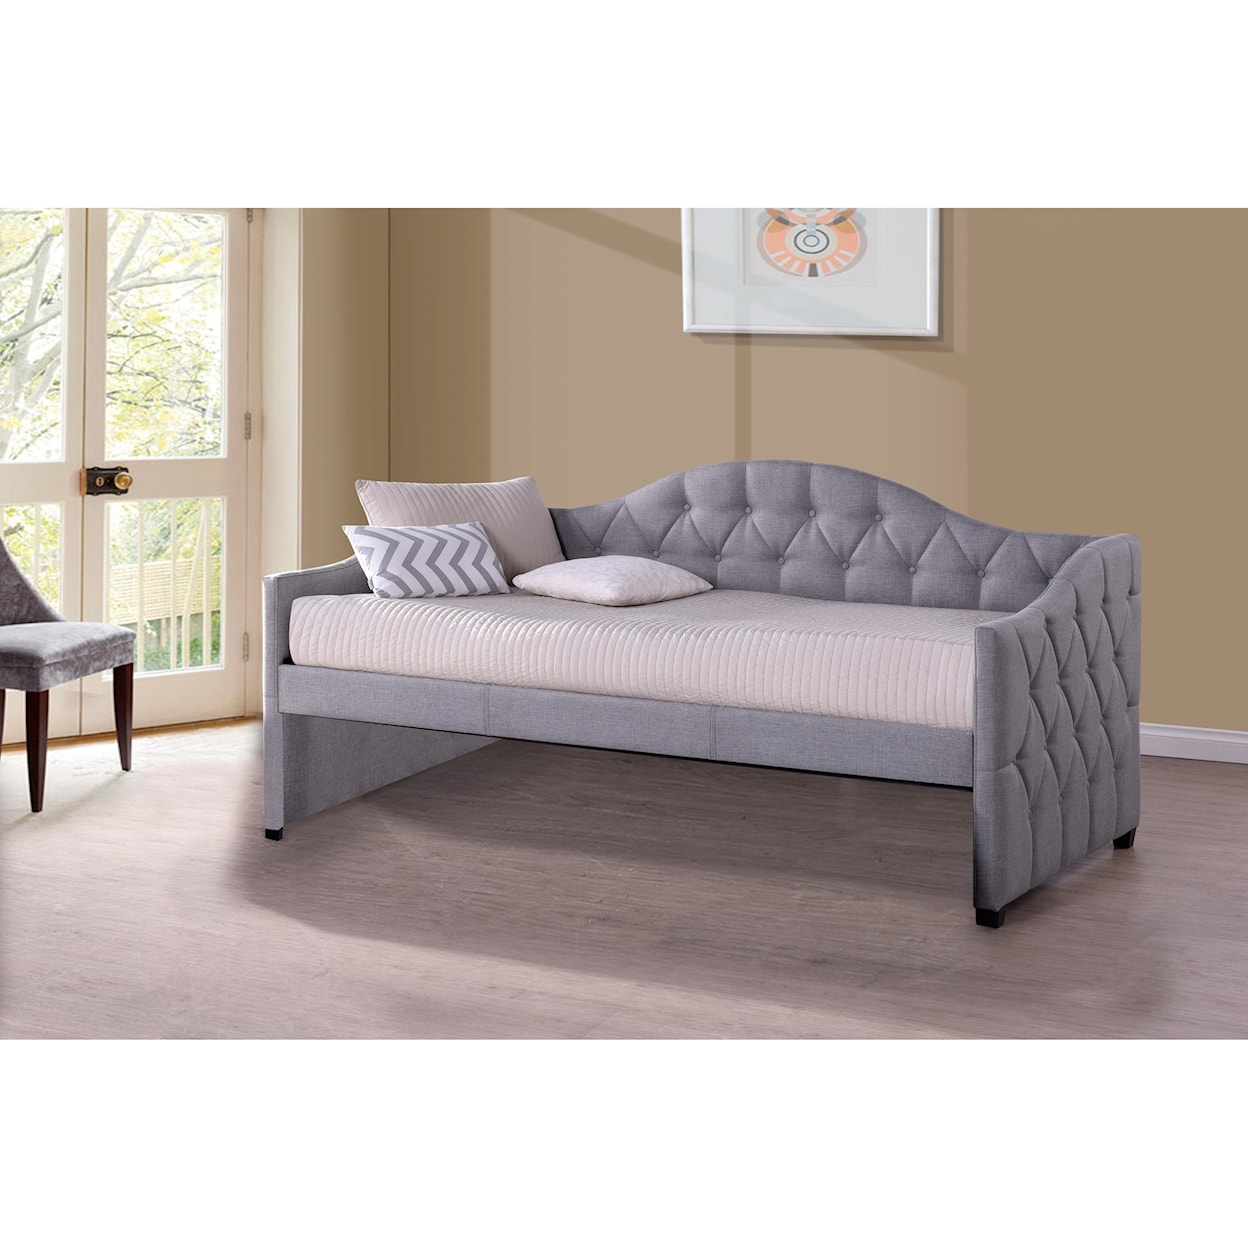 Hillsdale Daybeds Jamie(gray) daybed